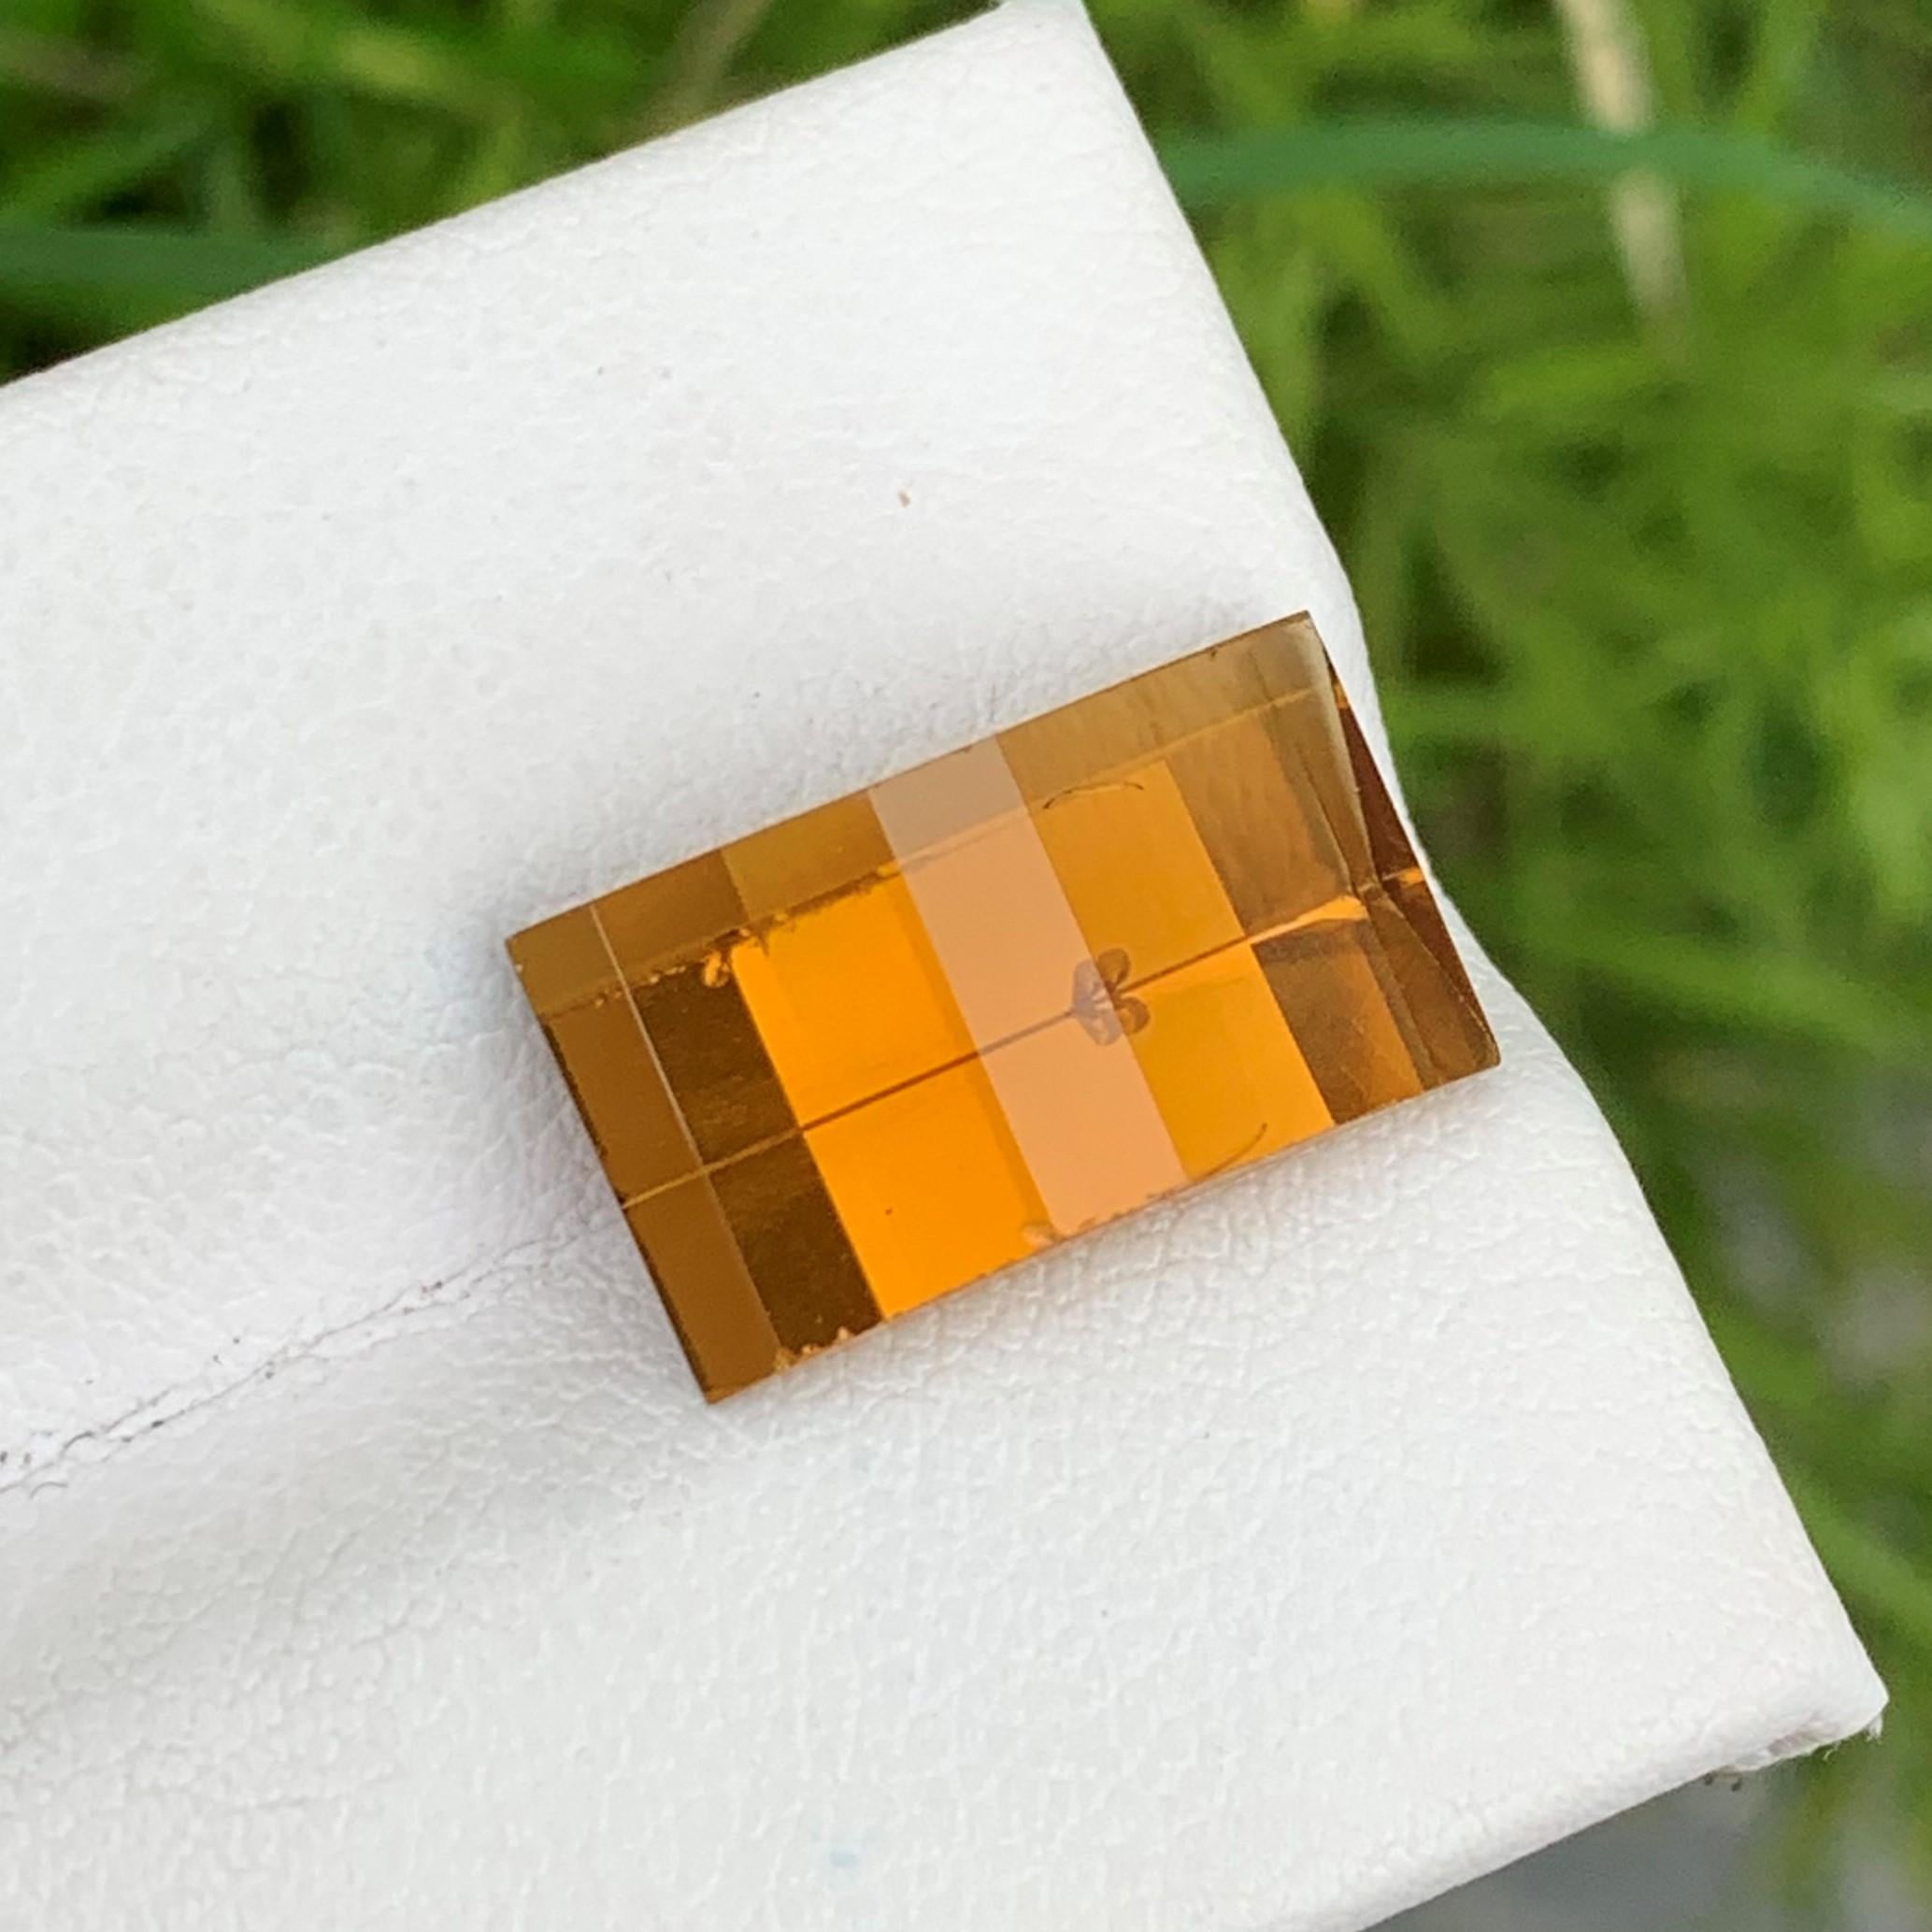 Faceted Citrine
Weight : 6.75 Carats
Dimensions : 15.2x8.6x6.9 Mm
Clarity : Clean
Origin : Brazil
Color: Brown Yellow
Shape: Pixel / Bar Cut
Certificate: On Demand
Month: November
.
The Many Healing Properties of Citrine
Increase Optimism, And Sunny